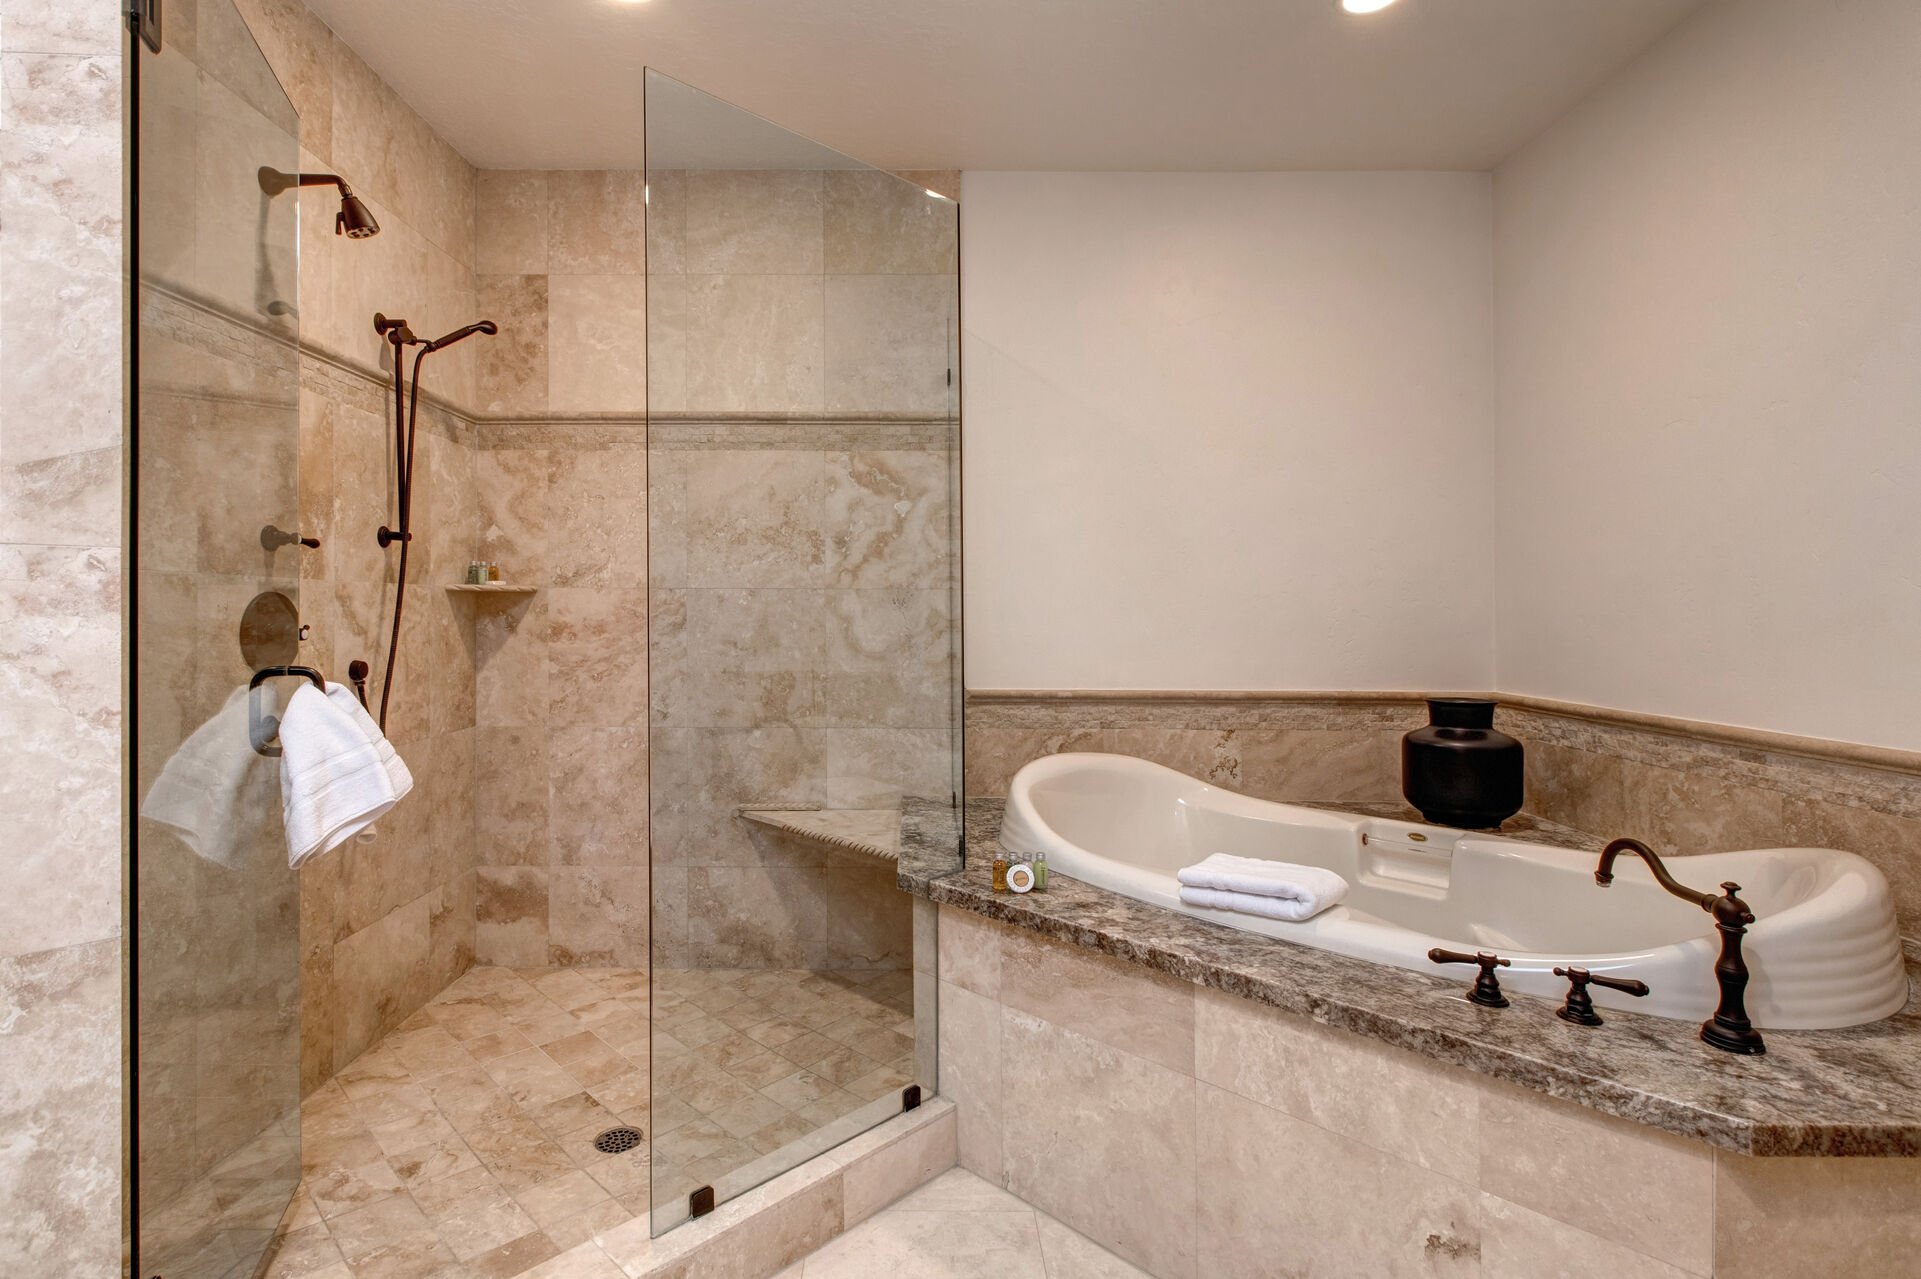 Main Level Grand Master bathroom with two granite vanities, large jetted soaking tub, and oversized tile shower